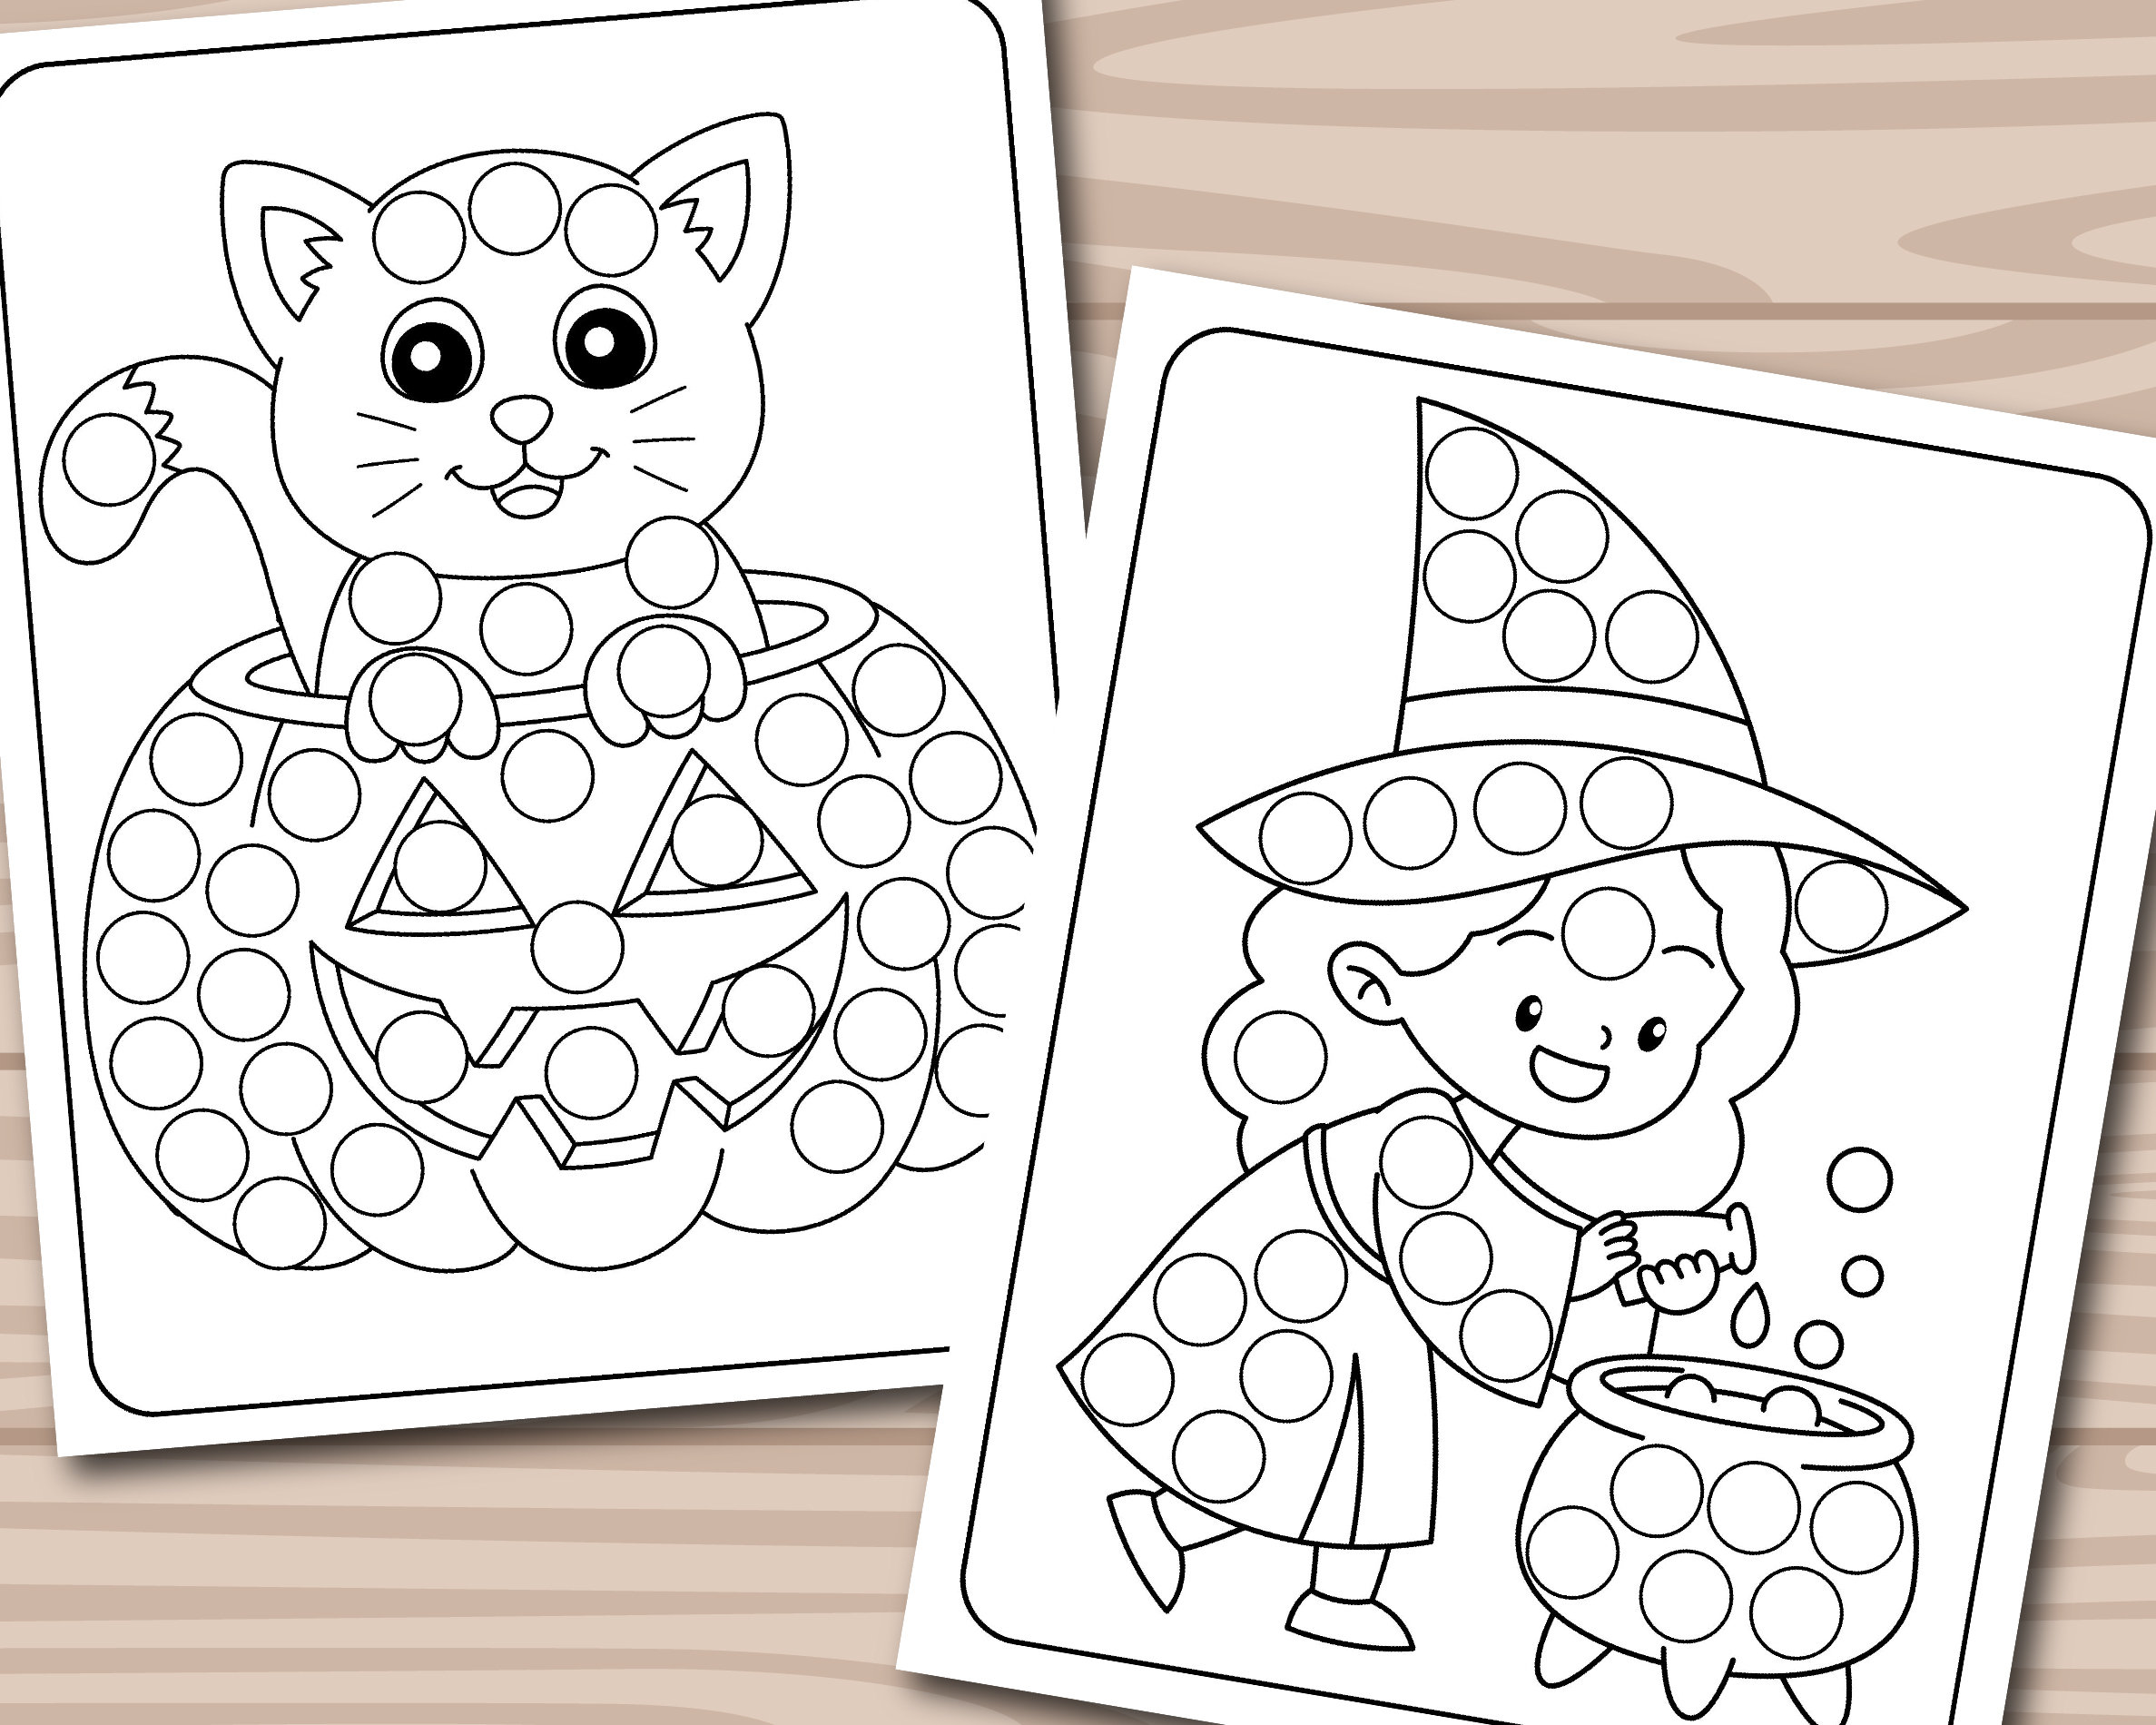 Dot Markers Activity Book - A Halloween Coloring Book For Toddlers: Fun  With Do A Dot Ghosts, Pumpkins and More. A Great Gift For Kids Ages 1-3.  (Paperback)